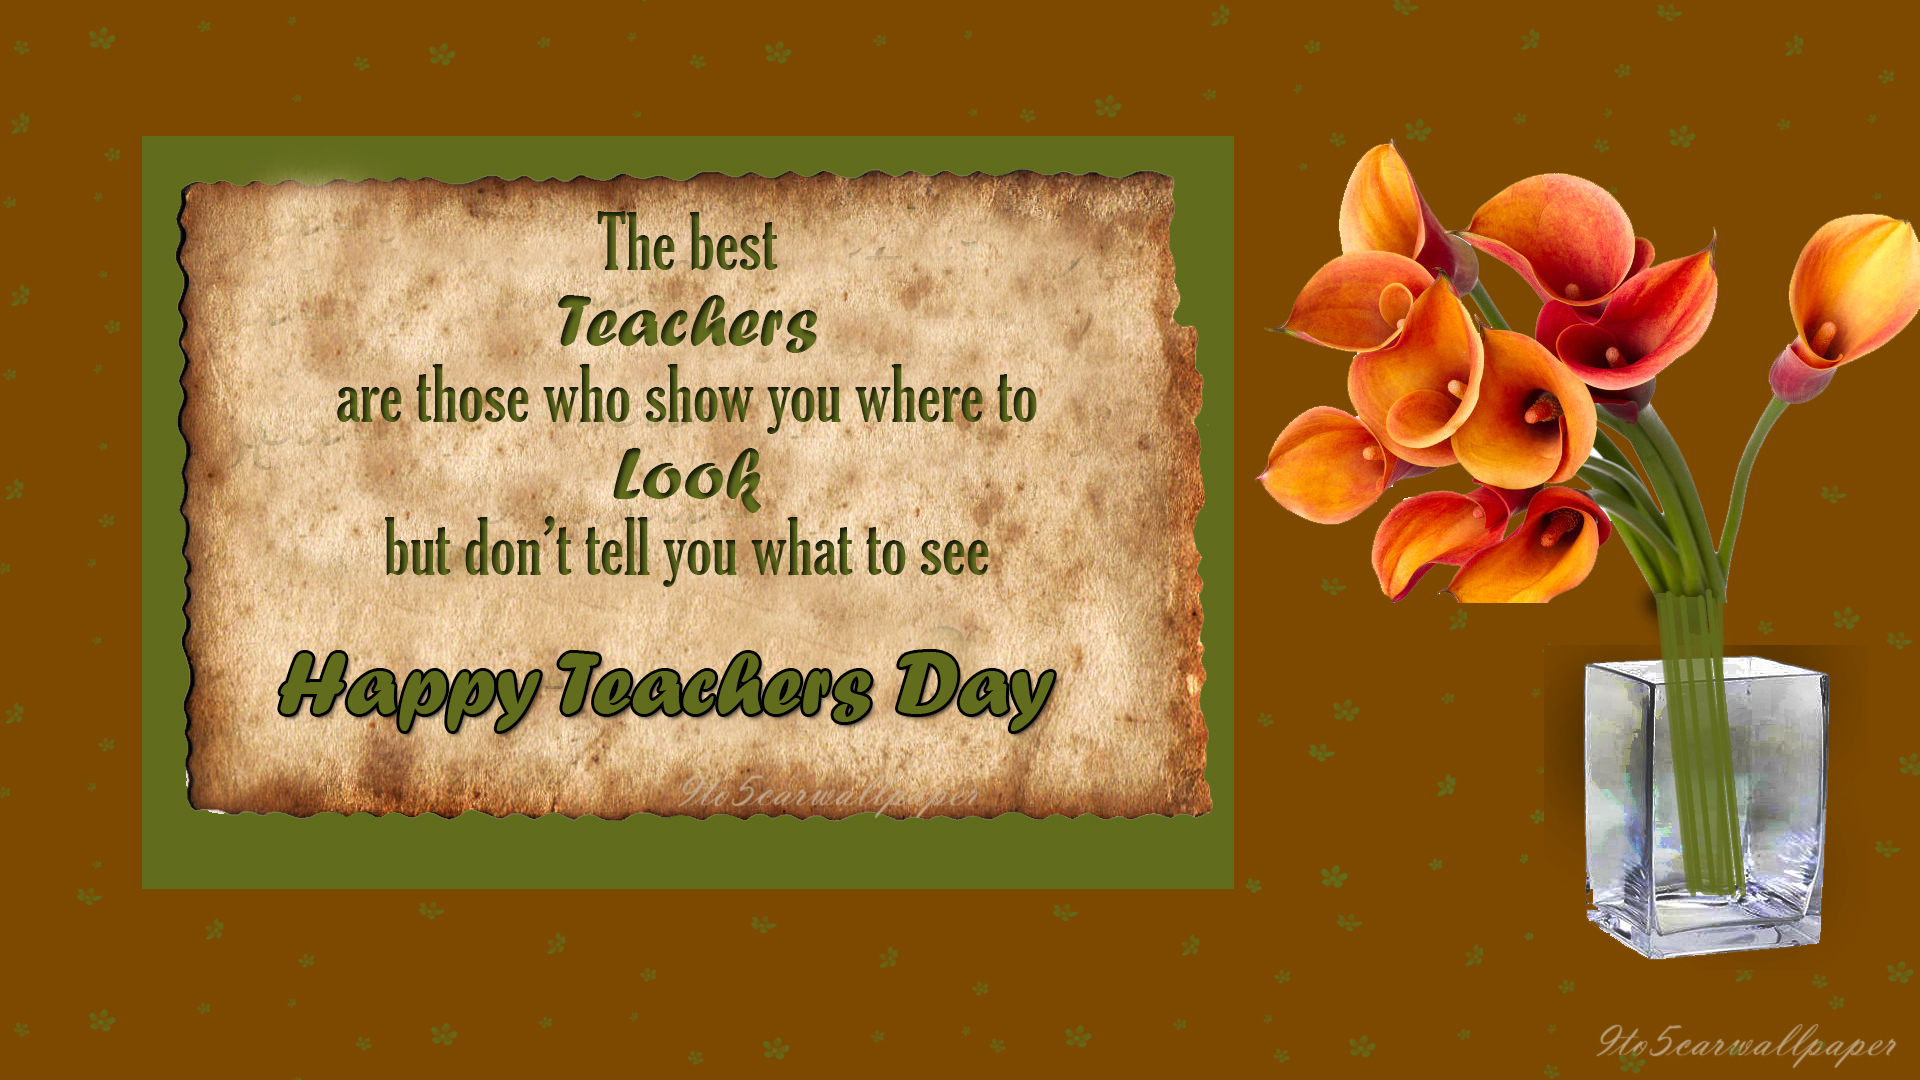 happy-teachers-day-images-quotes-cards-posters-wallpapers-2017